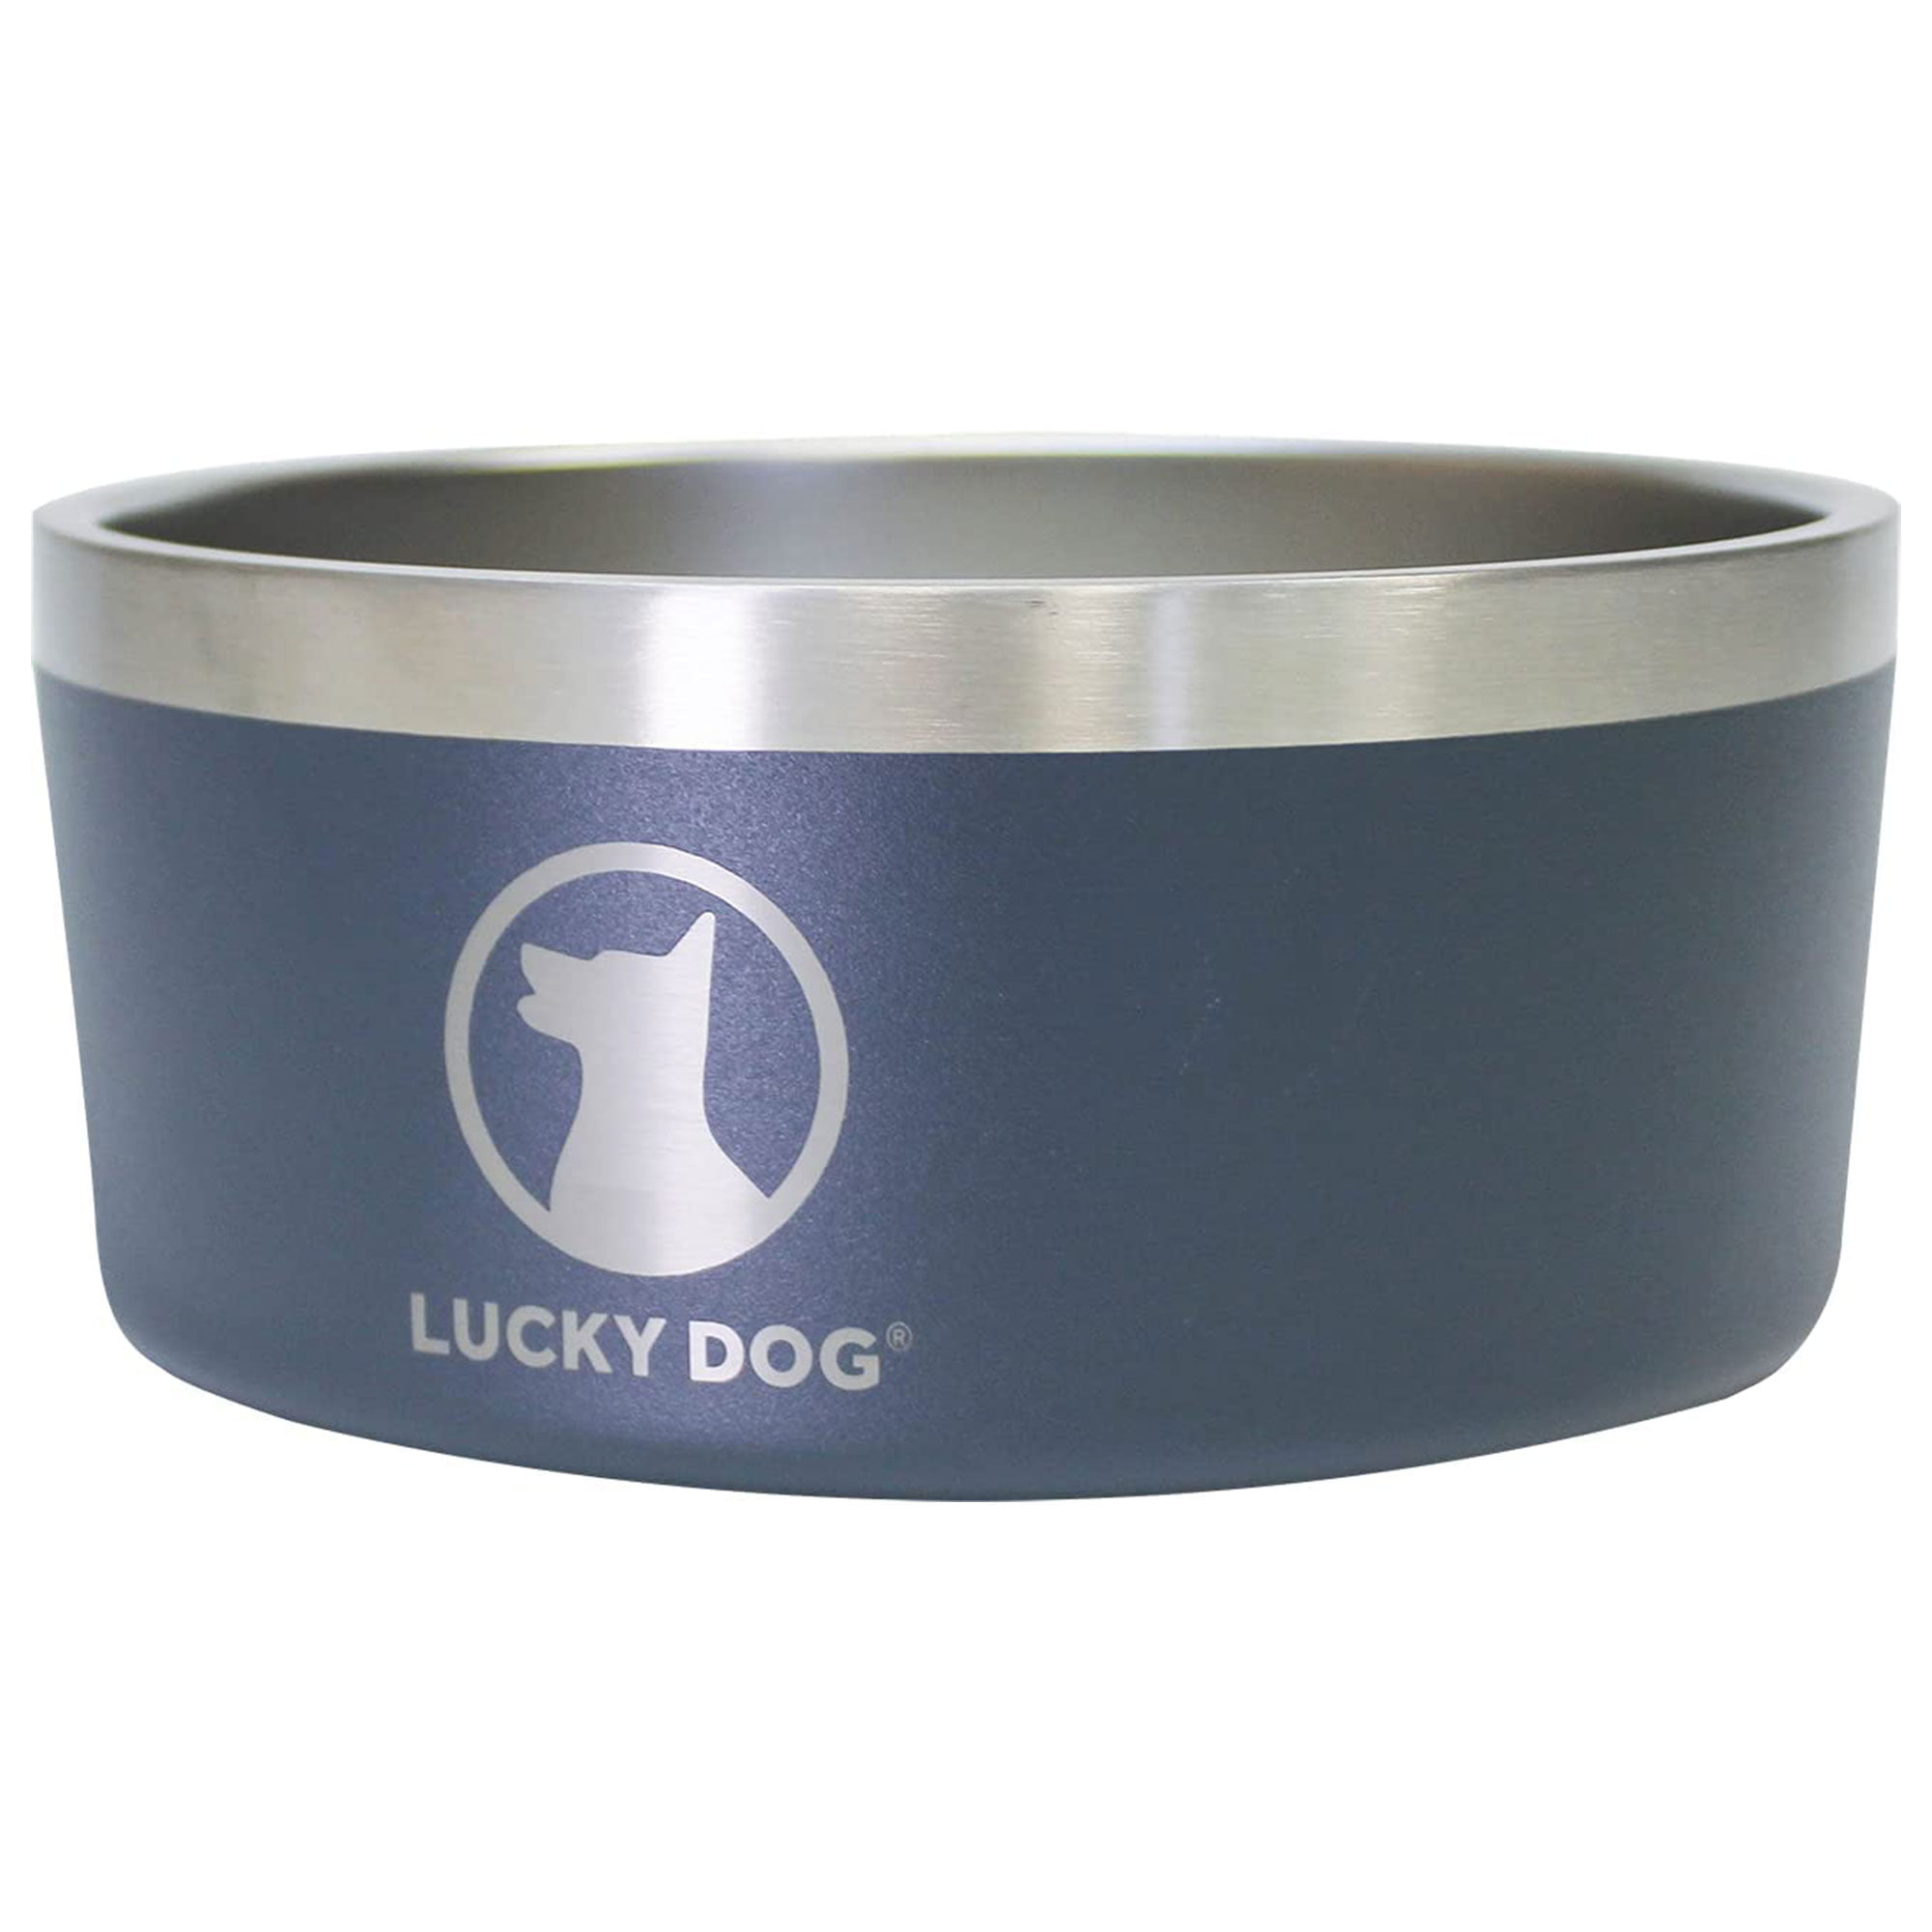 Lucky Dog Indulge Black Double Wall Stainless Steel Dog Bowl, 12.5 Cups